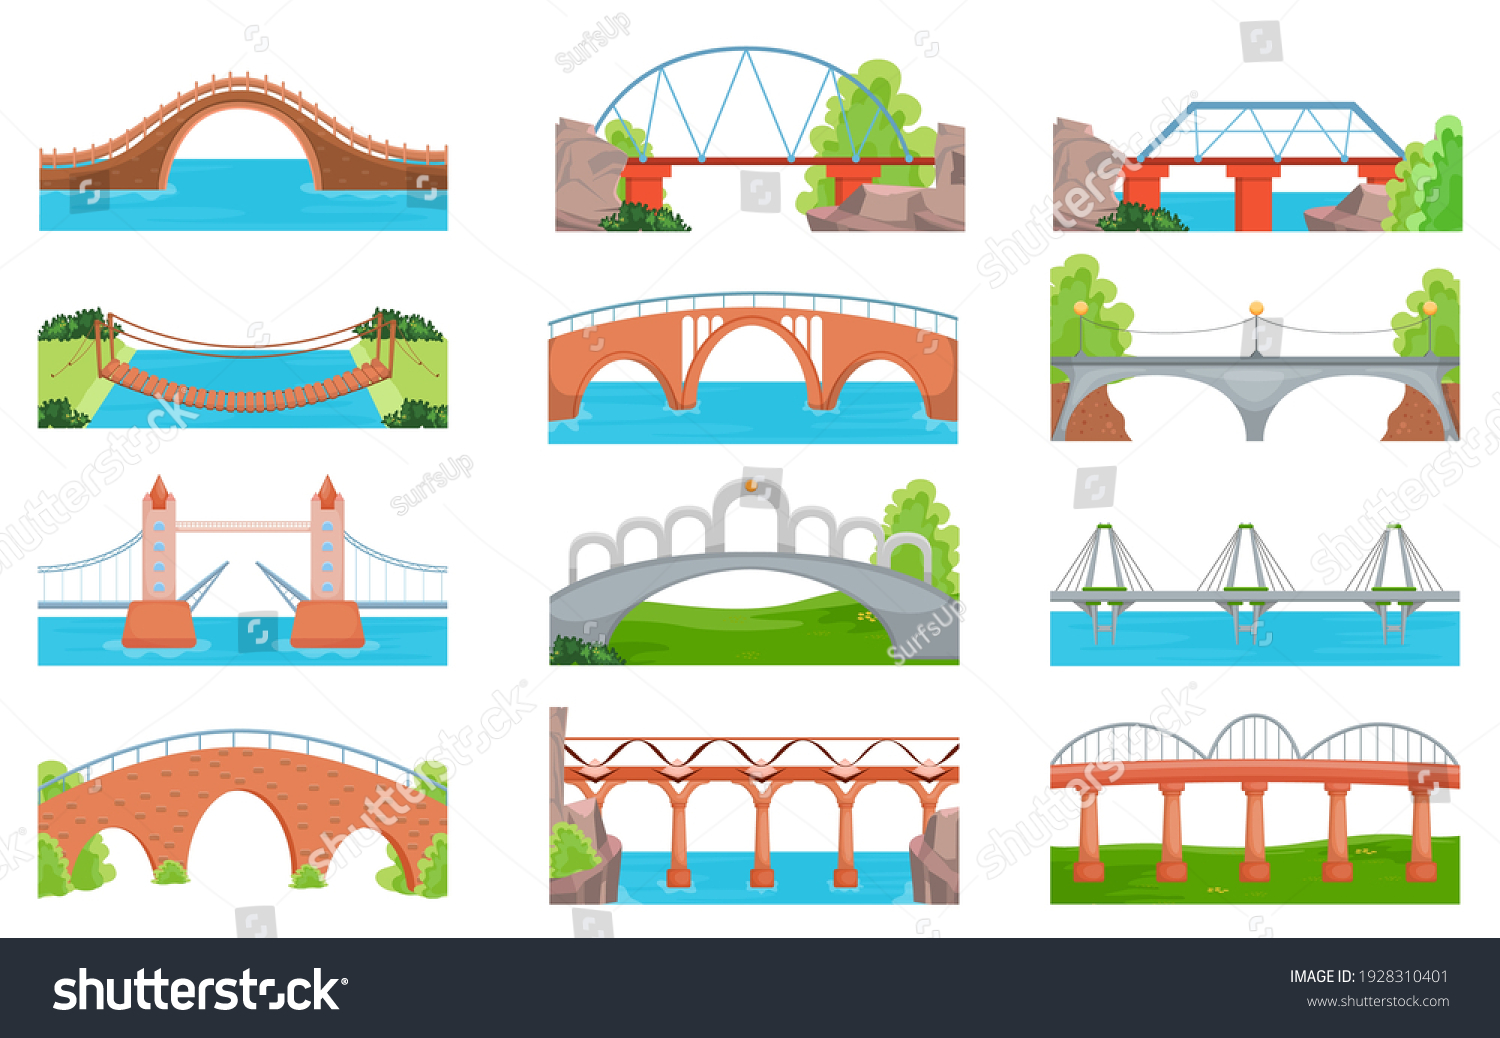 SVG of Modern and traditional bridges set. City and countryside crossovers, arch constructions over rivers or landscapes, aqueducts. Vector illustrations for architecture, transportation, engineering concept svg